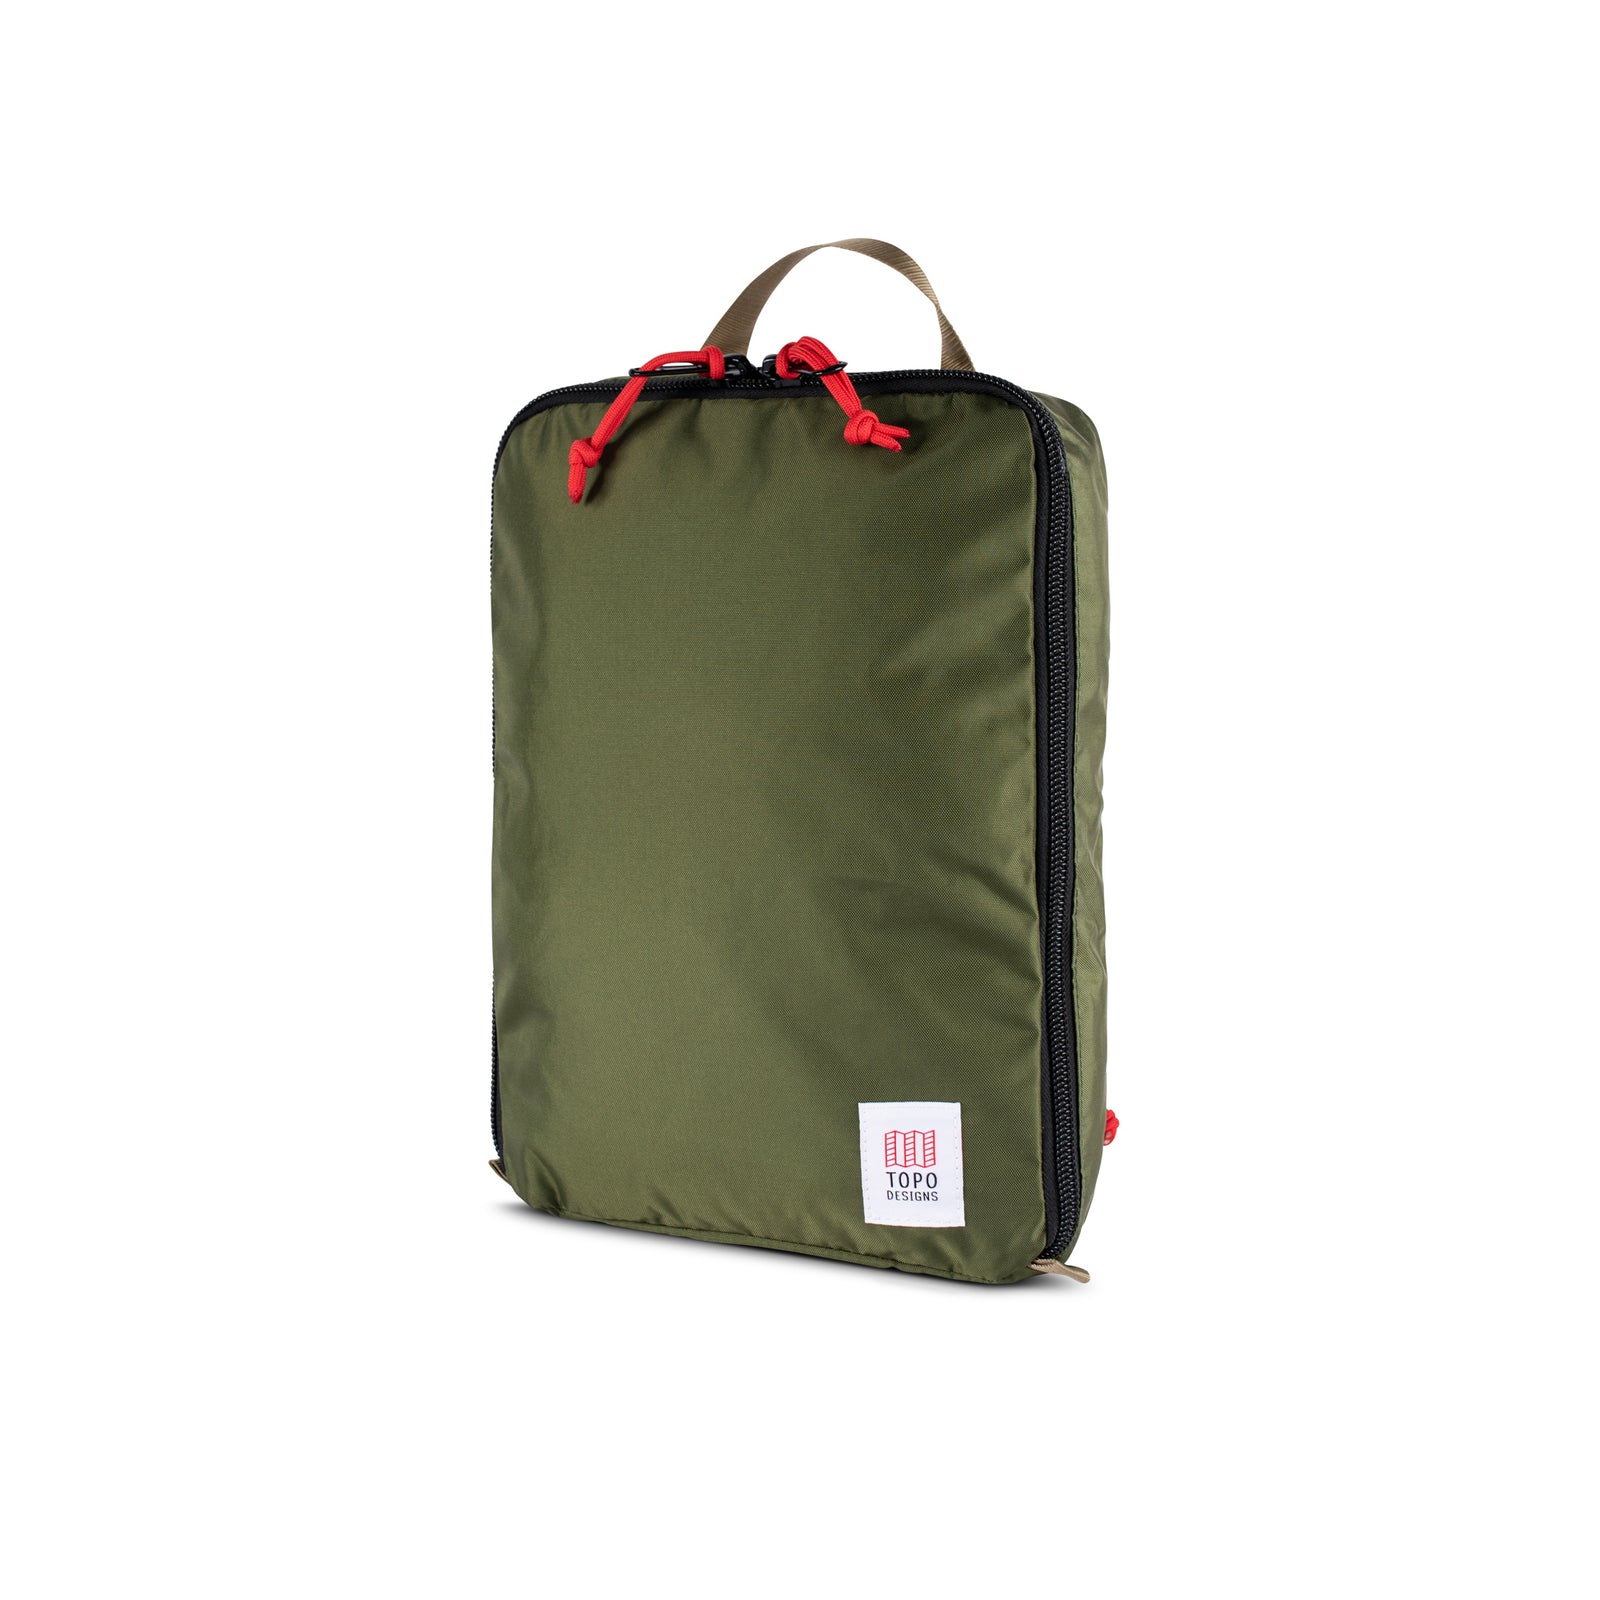 Topo Designs Pack Bag 10L travel packing cube in "Olive" Green.